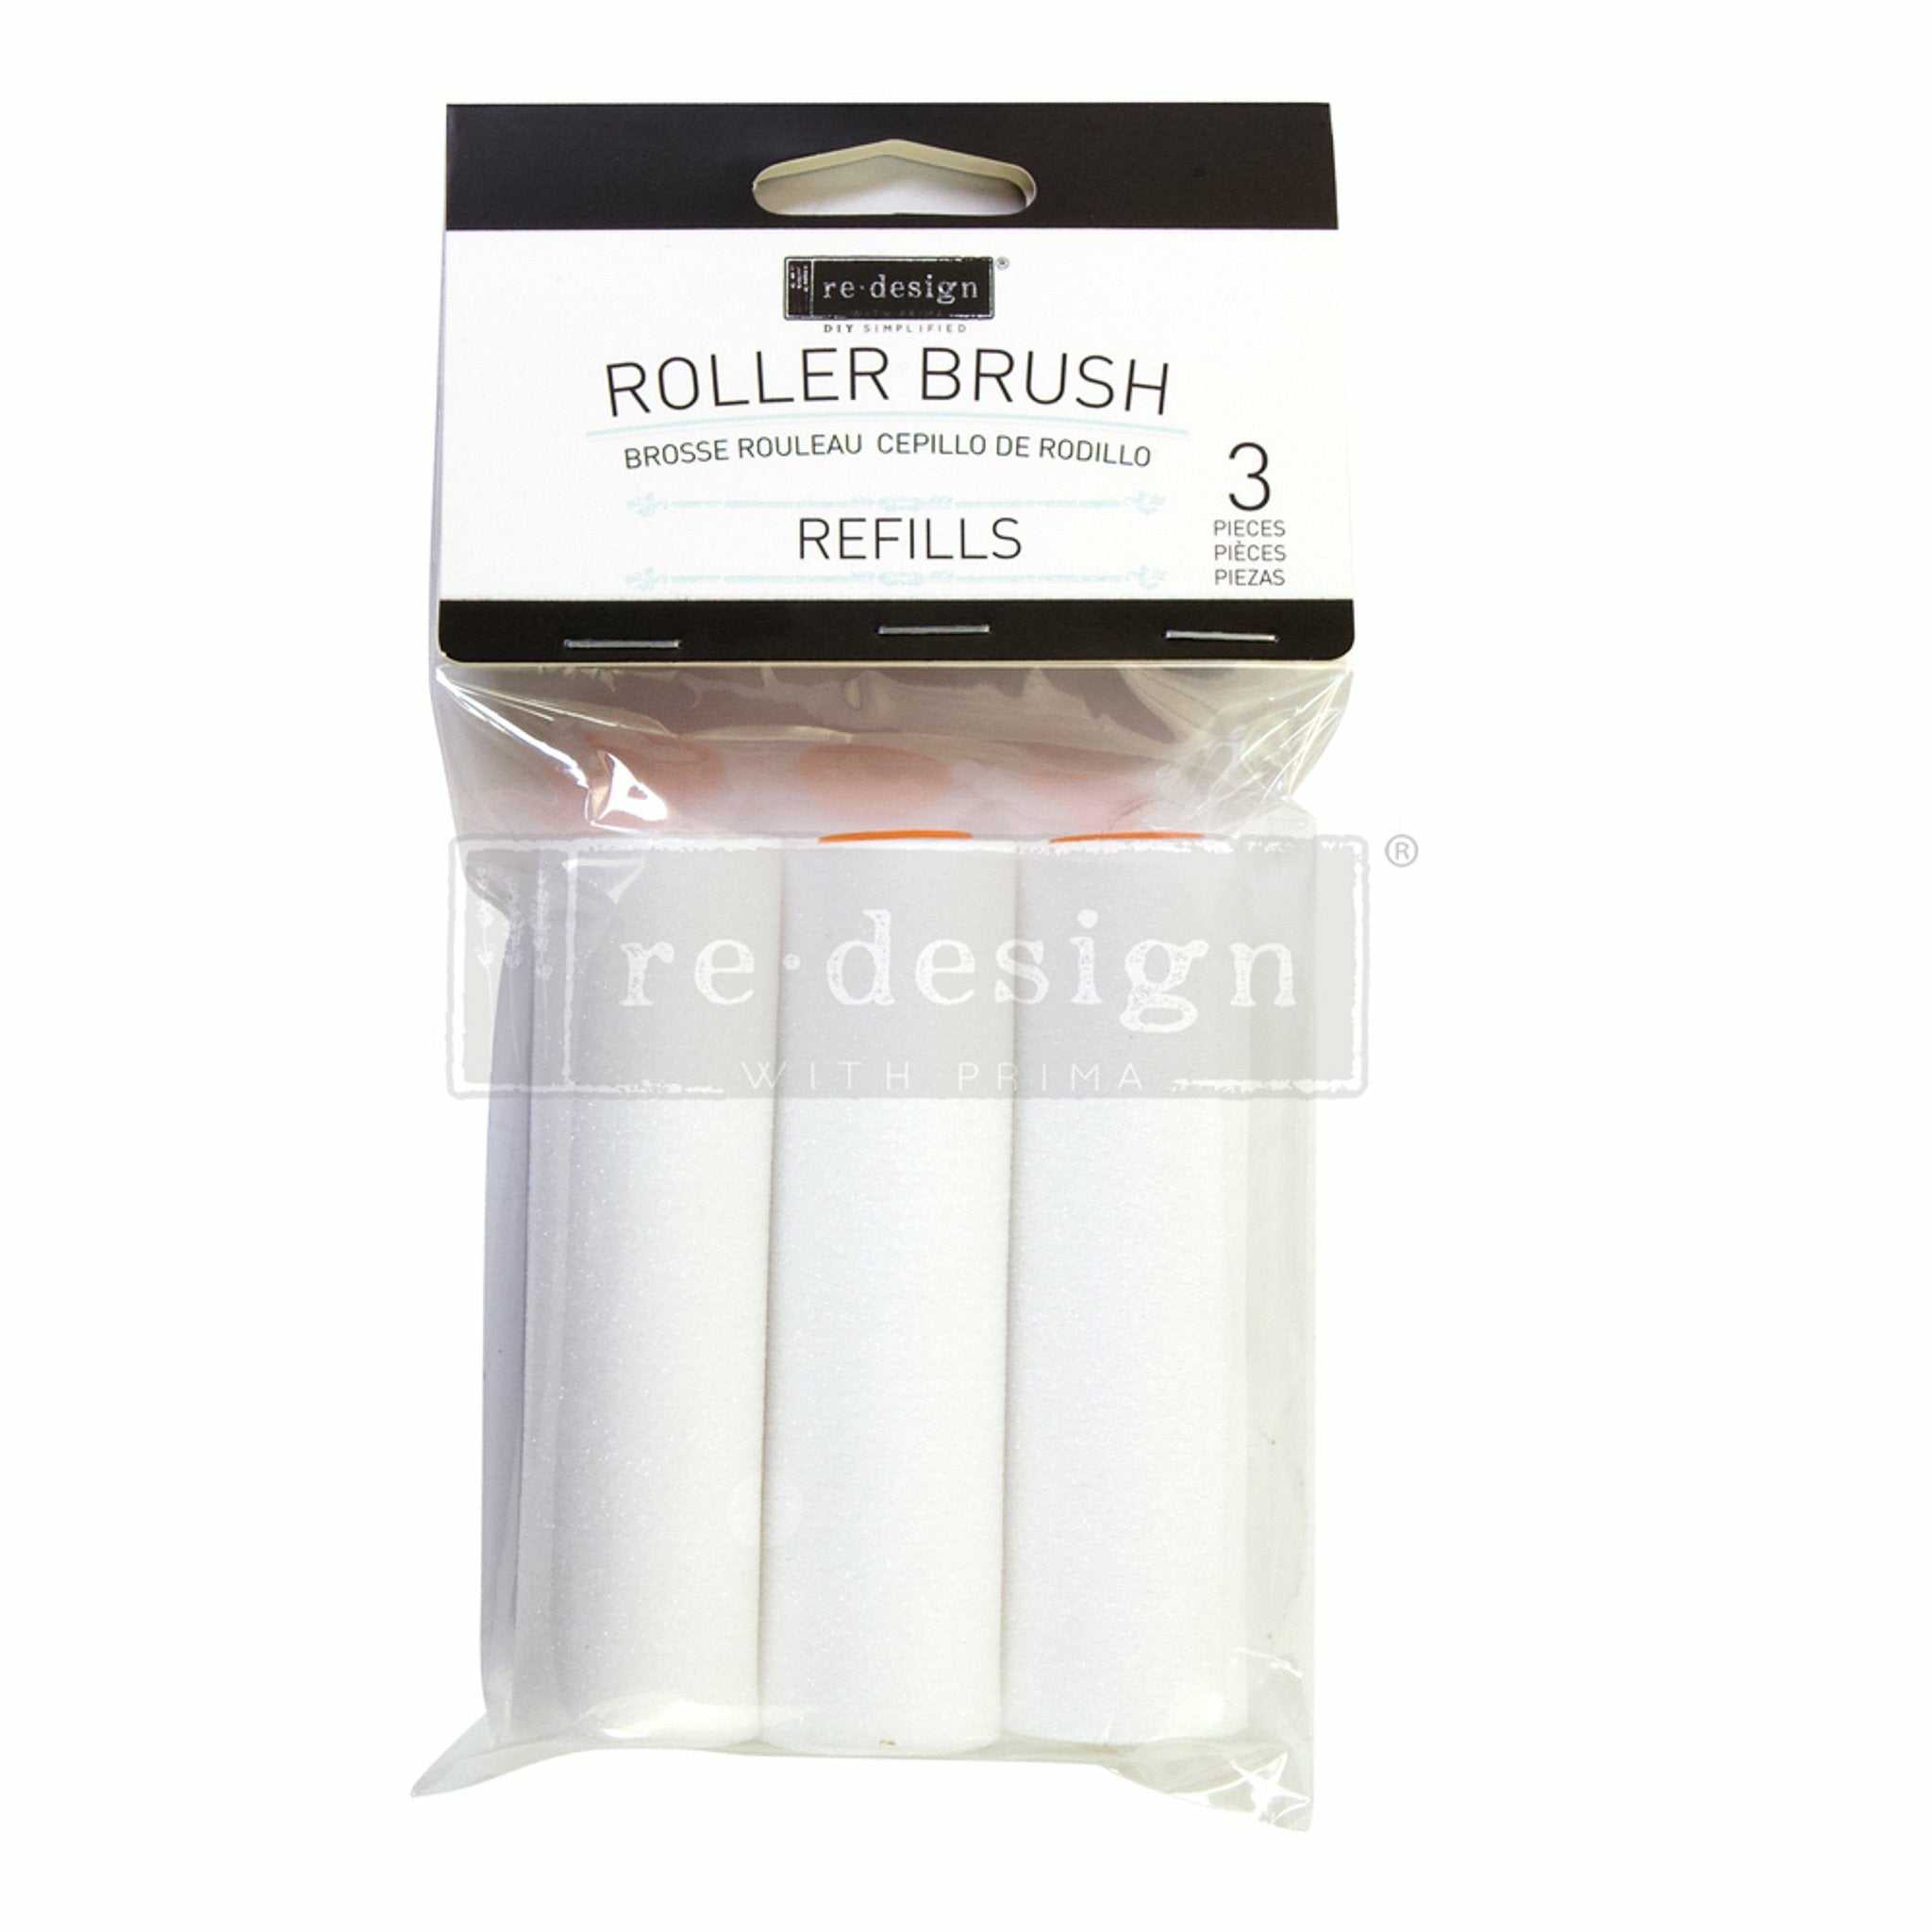 White background with a package of foam rollers reading: Redesign diy simplified. Roller Brush. Brosse Rouleau Cepillo De Rodillo. Refills. 3 pieces . pieces. piezas. A transparent redesign logo is on top.